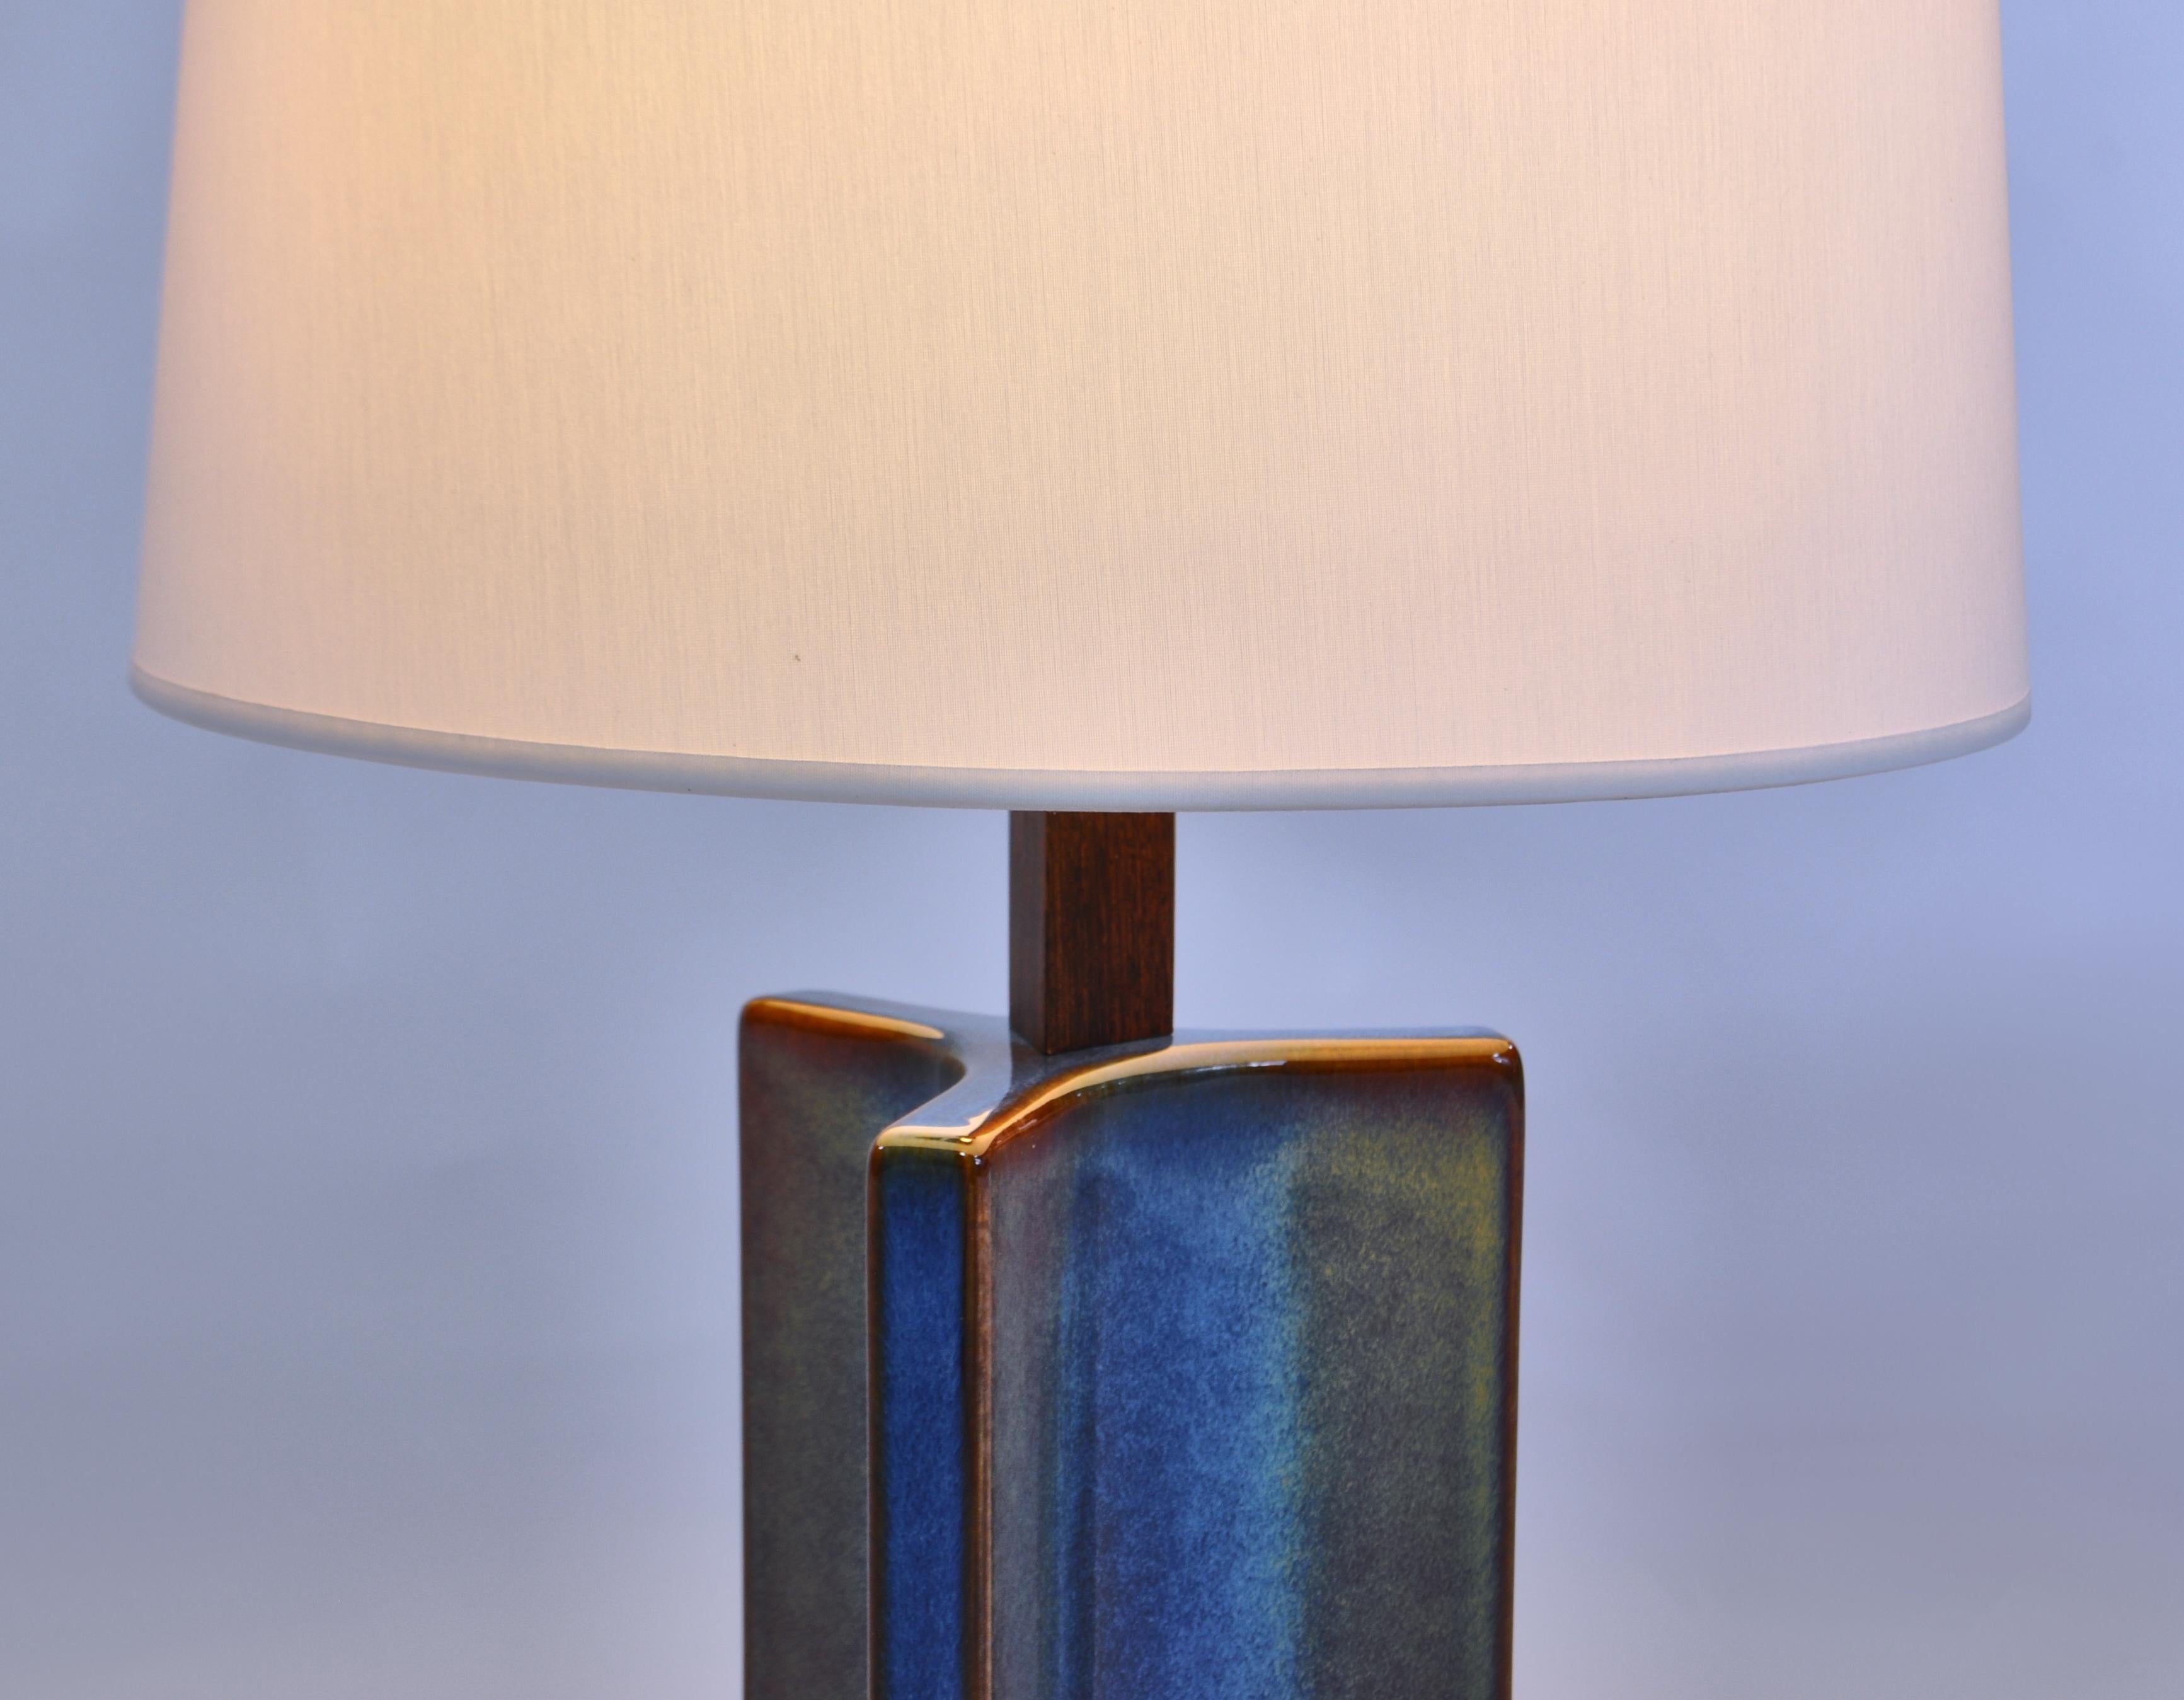 Beautiful vintage triangular ceramic table lamps with blue/brown glaze by 